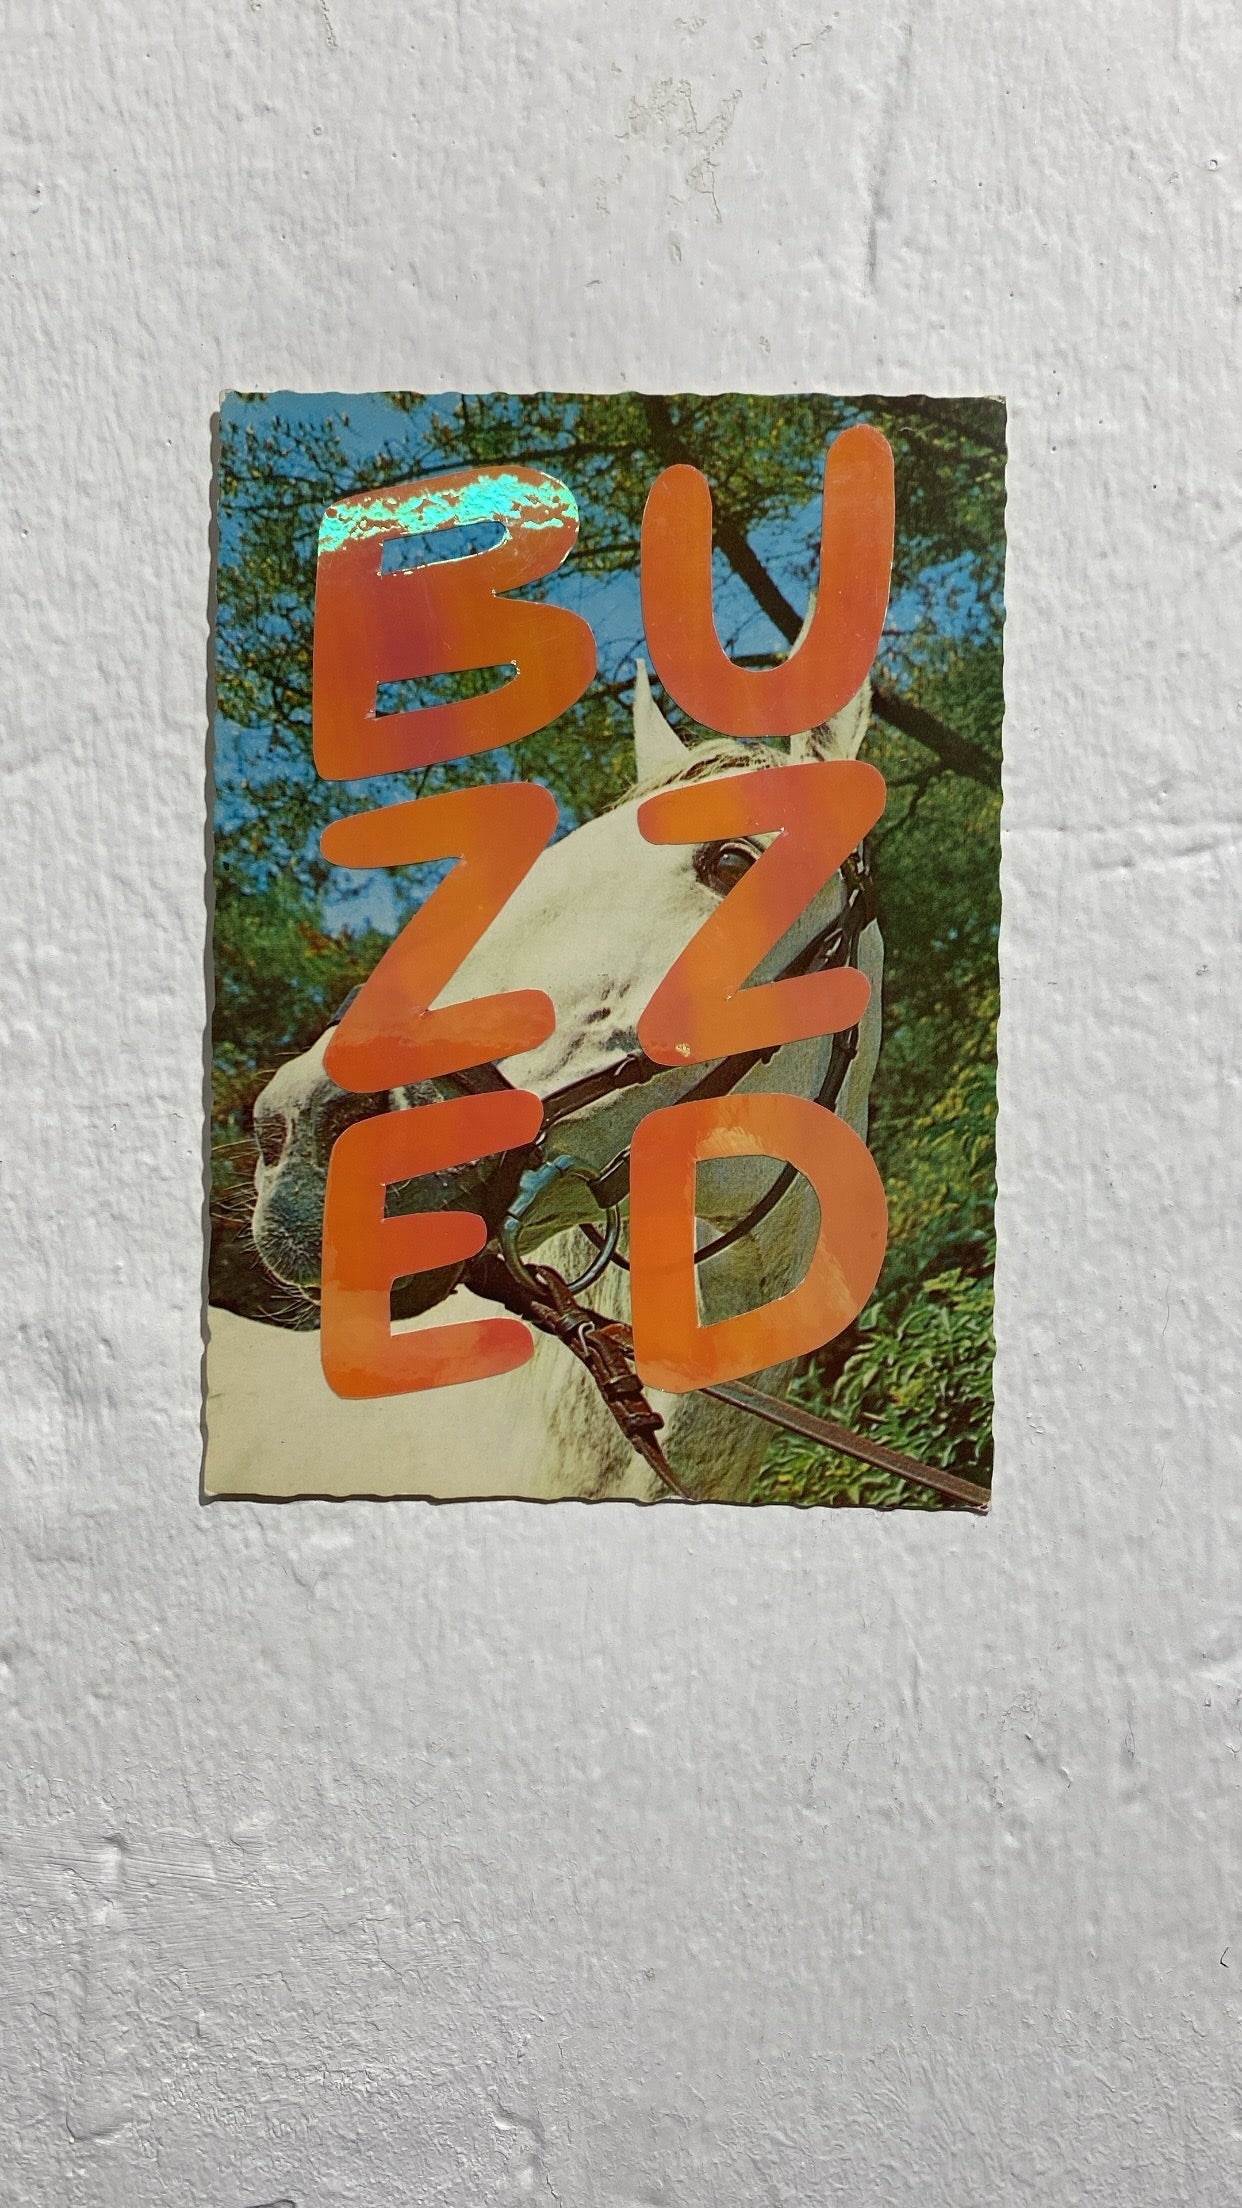 Collage – "Buzzed"